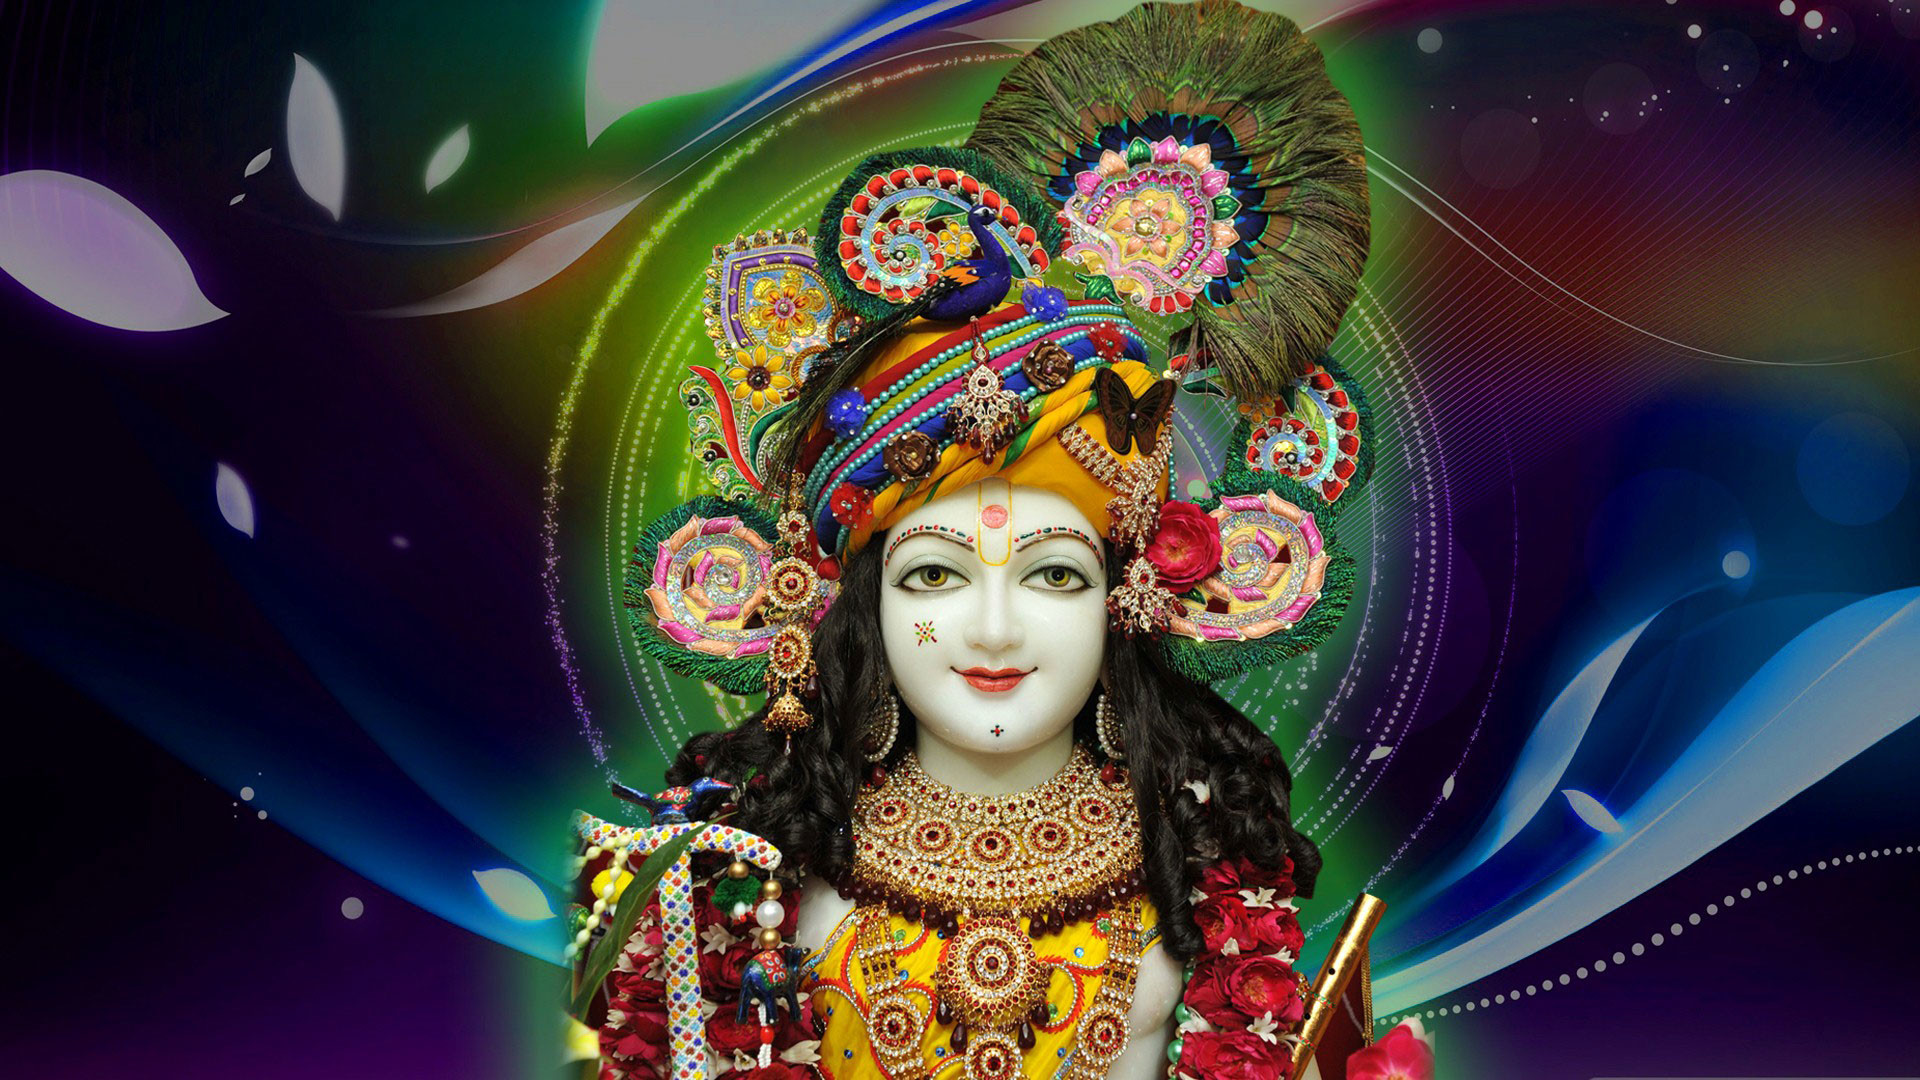 Hindu God Wallpapers For Mobile Phones God Images Amp Hd Photos 1920x1080